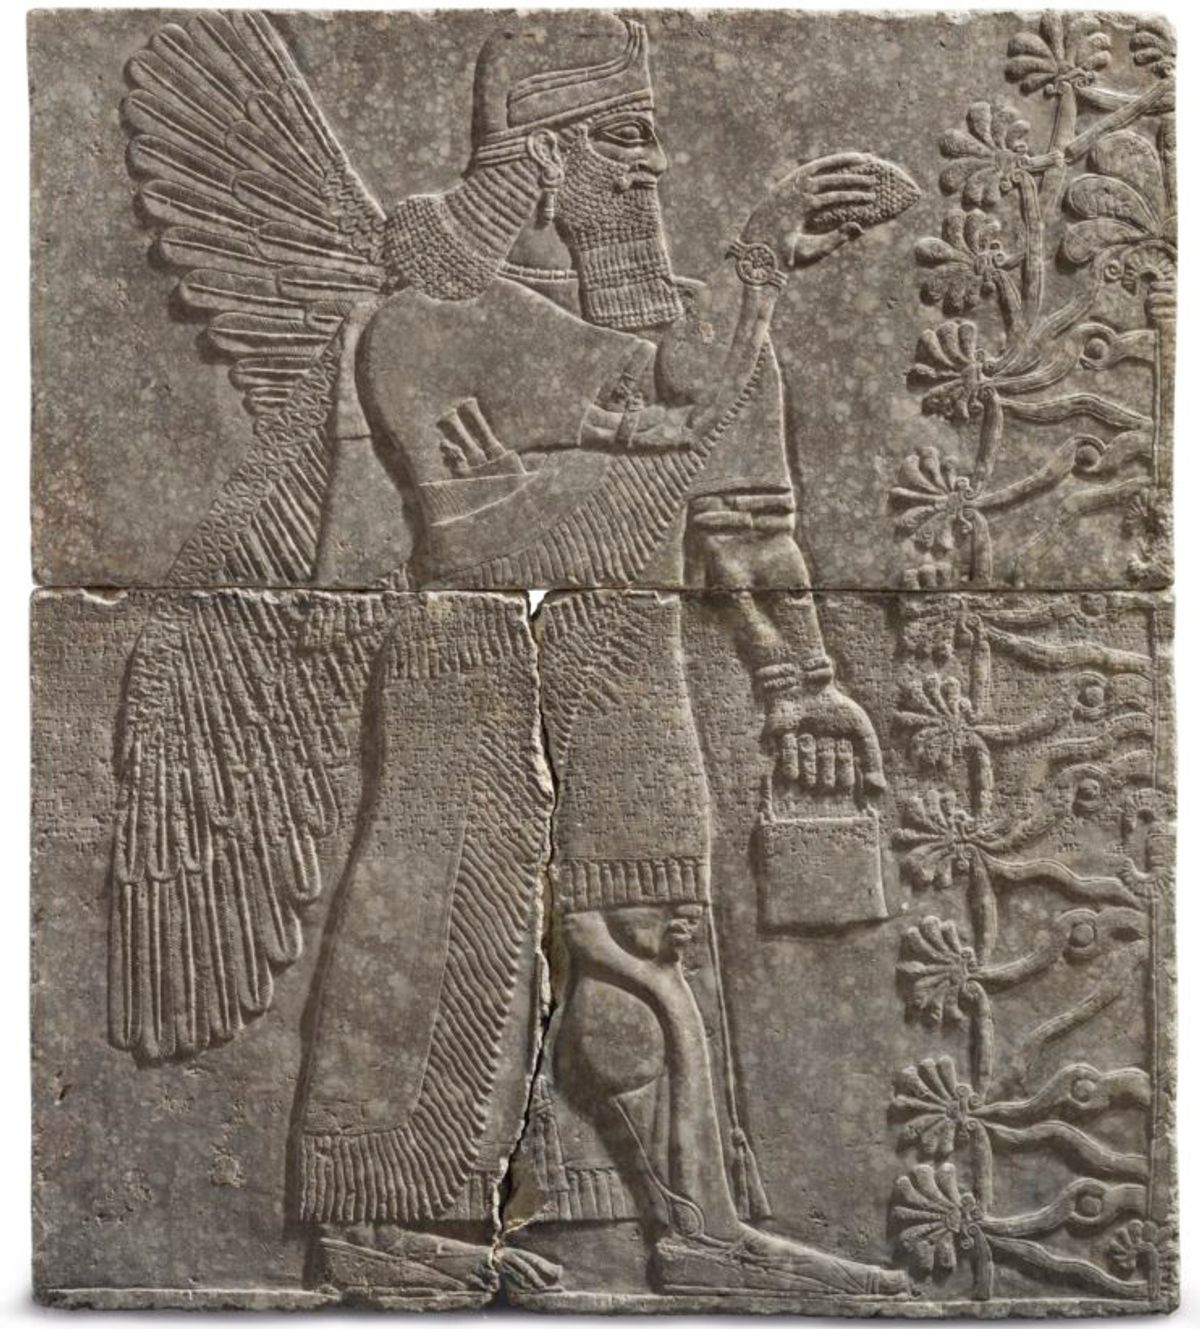 An Assyrian gypsum relief of a Winged Genius sold for $30.1m on 31 October in New York. Courtesy of Christie's Images Ltd 2018.